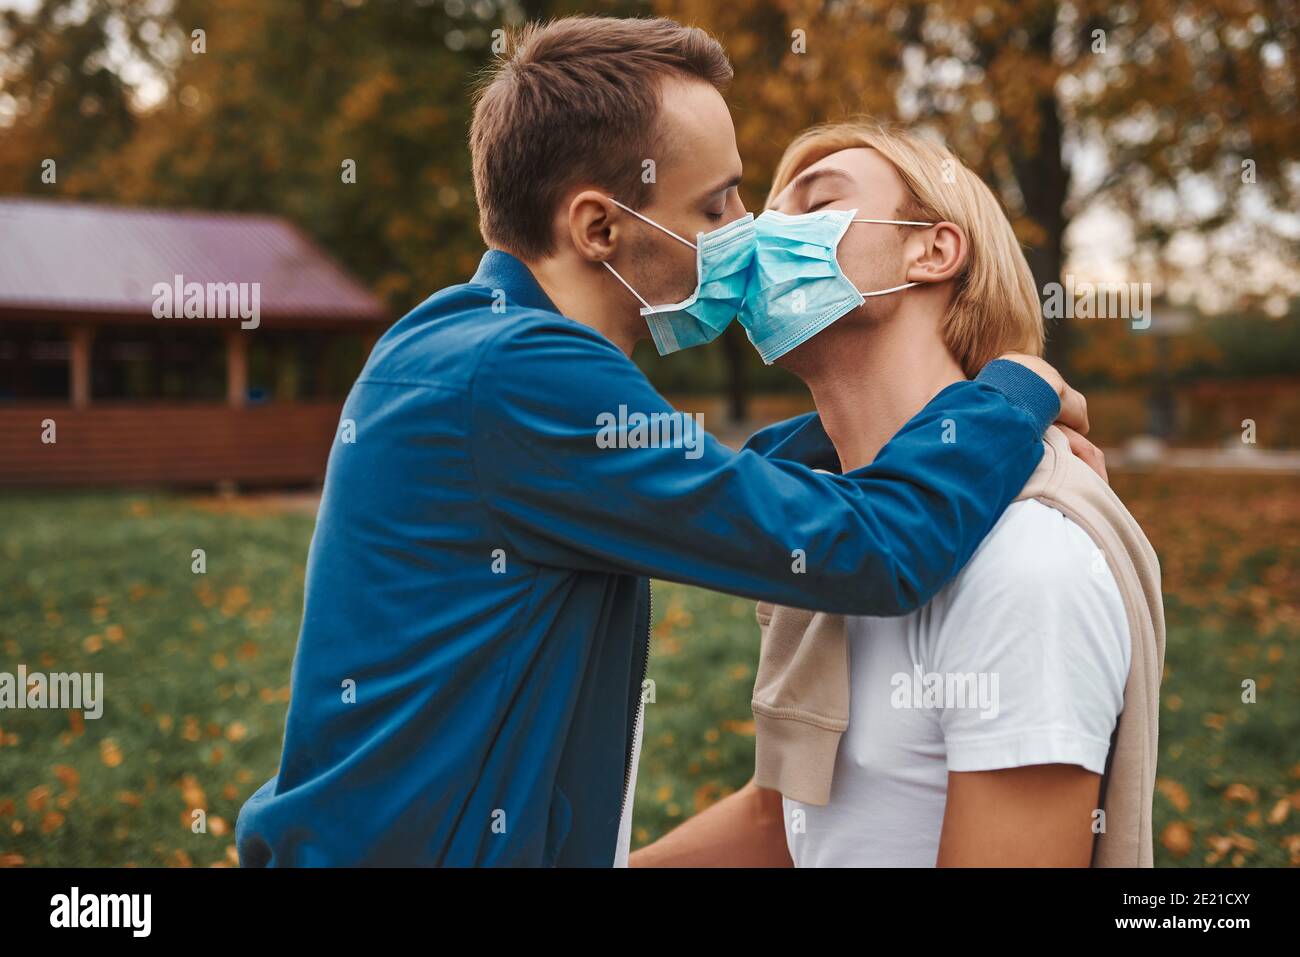 Romantic gay couple outdoors. Love during coronavirus. Two handsome men kissing wearing face masks. Covid-19 protection. Stock Photo